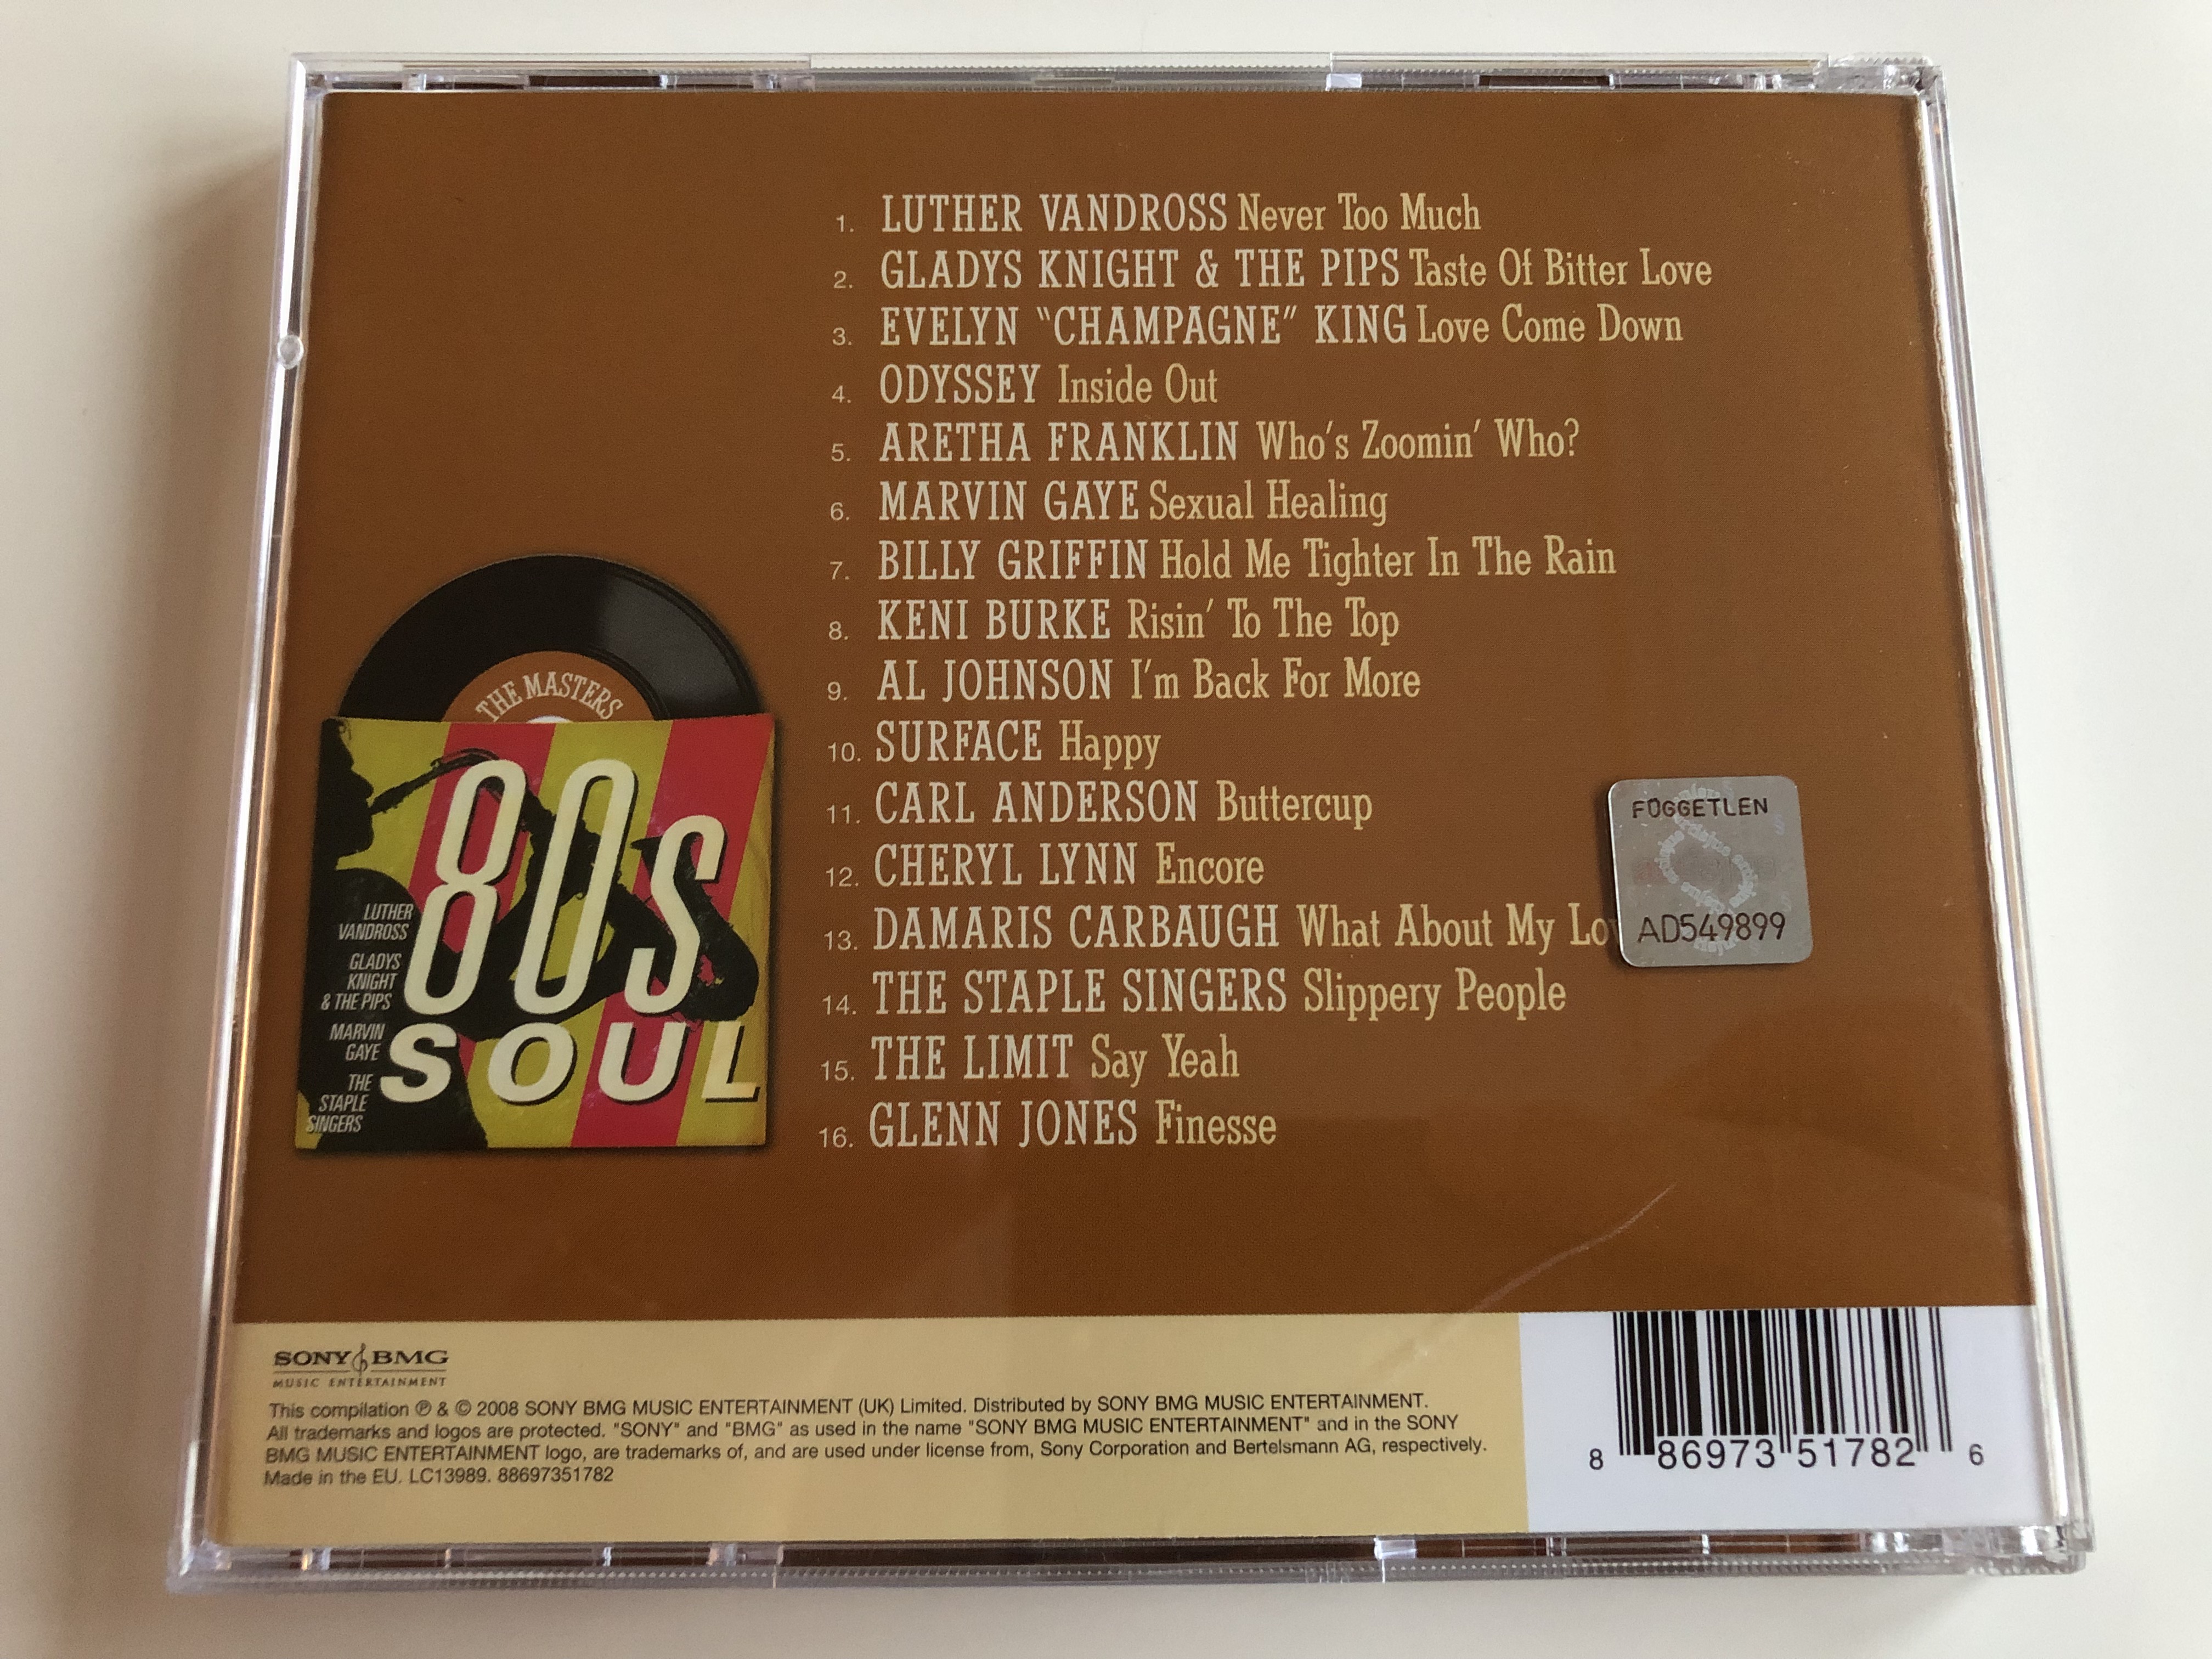 the-masters-80s-soul-luther-vandross-gladys-knight-the-pips-marvin-gaye-the-staple-singers-sony-bmg-music-entertainment-audio-cd-2008-88697351782-4-.jpg